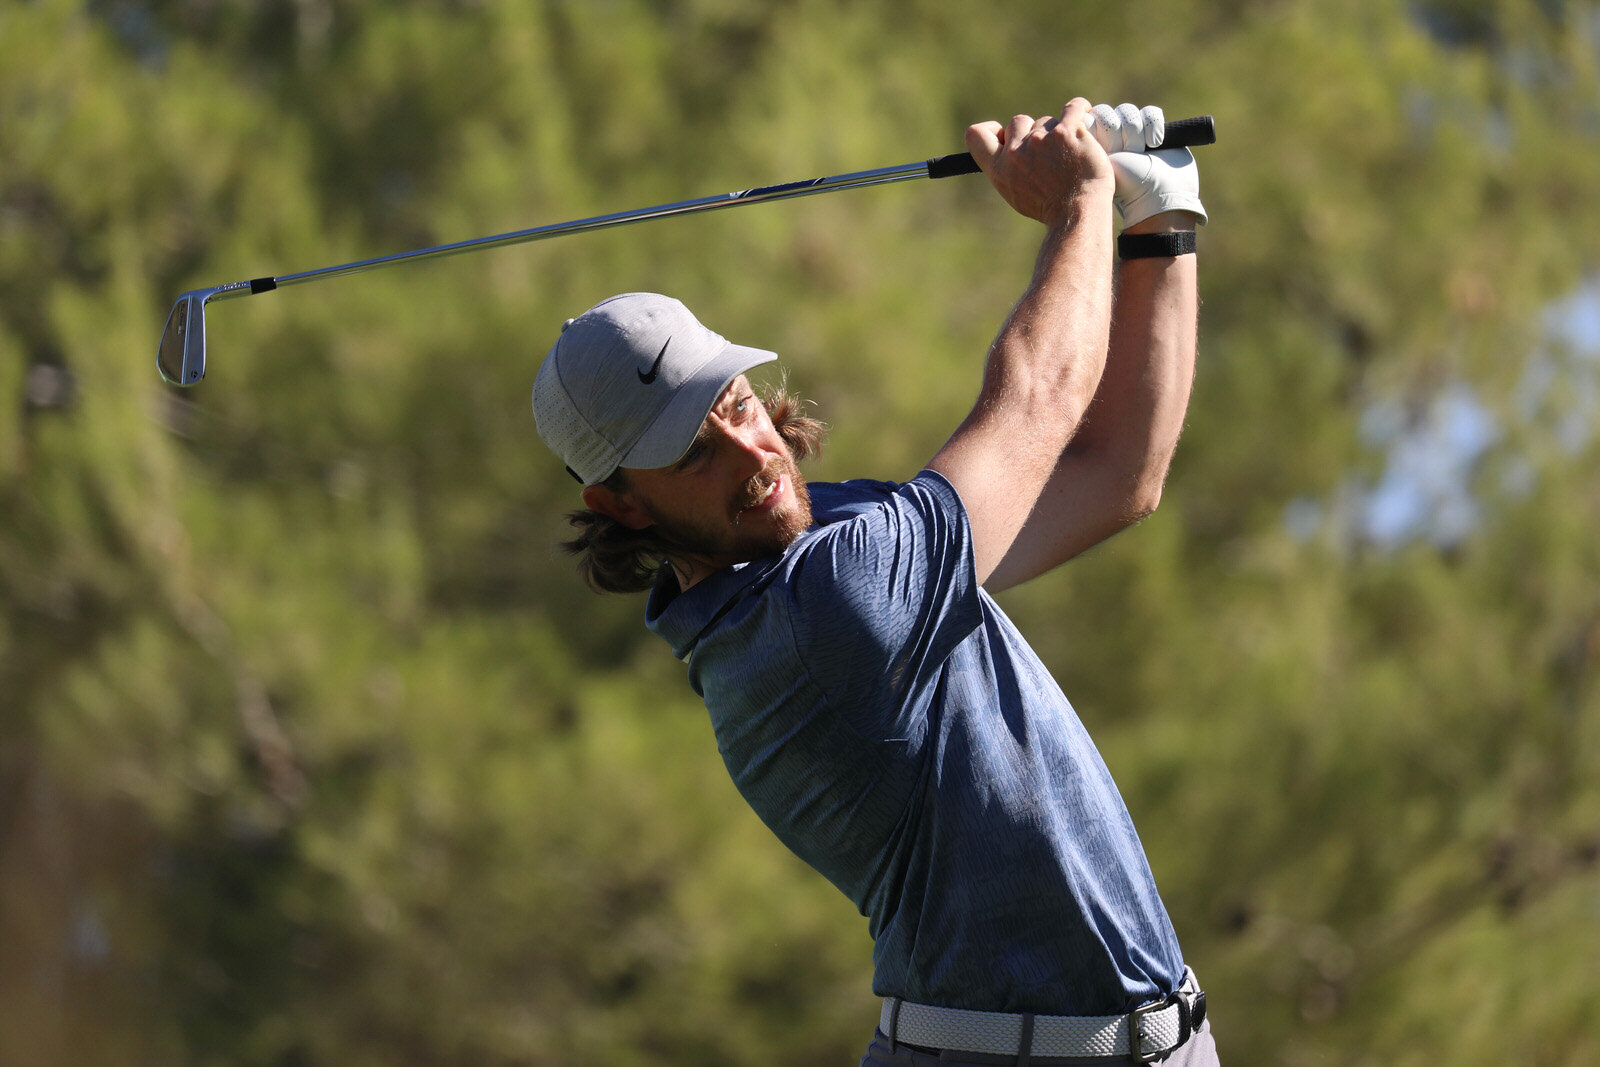  LAS VEGAS, NEVADA - OCTOBER 15: Tommy Fleetwood of England plays his shot from the 13th tee during the first round of The CJ Cup @ Shadow Creek on October 15, 2020 in Las Vegas, Nevada. (Photo by Christian Petersen/Getty Images) 